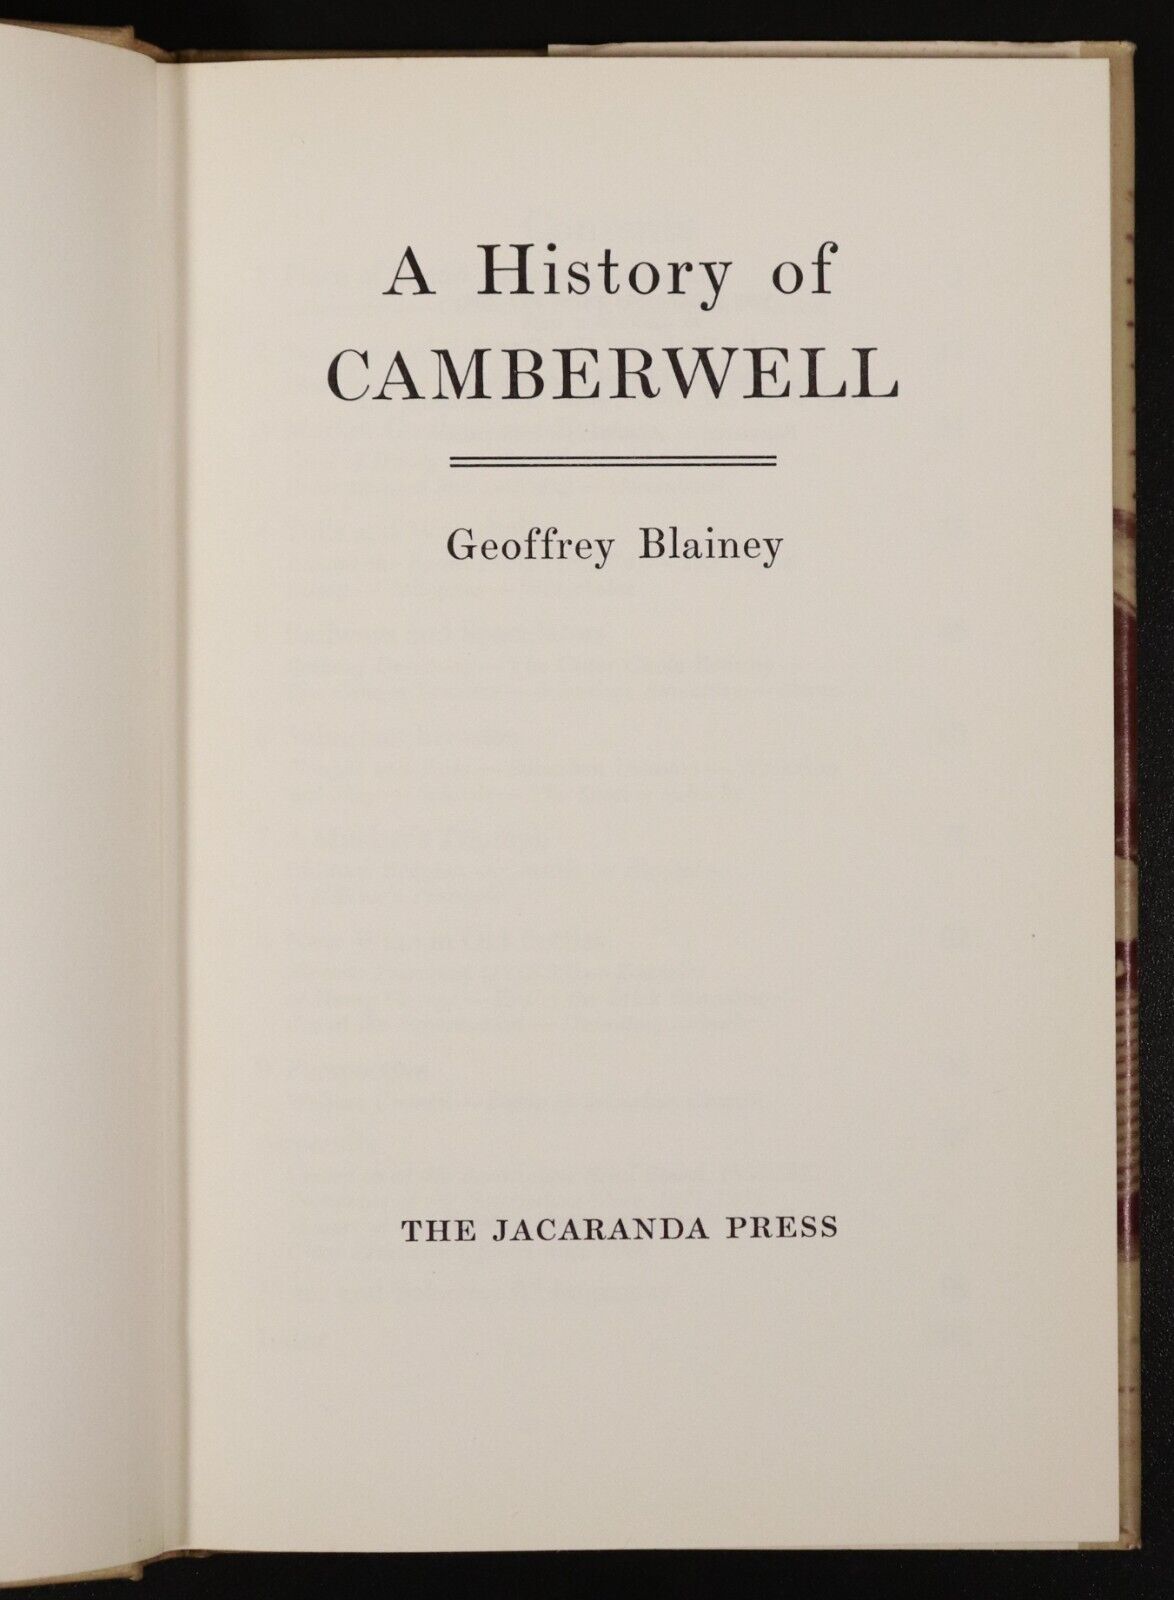 1964 A History Of Camberwell by Geoffrey Blainey Melbourne Local History Book - 0